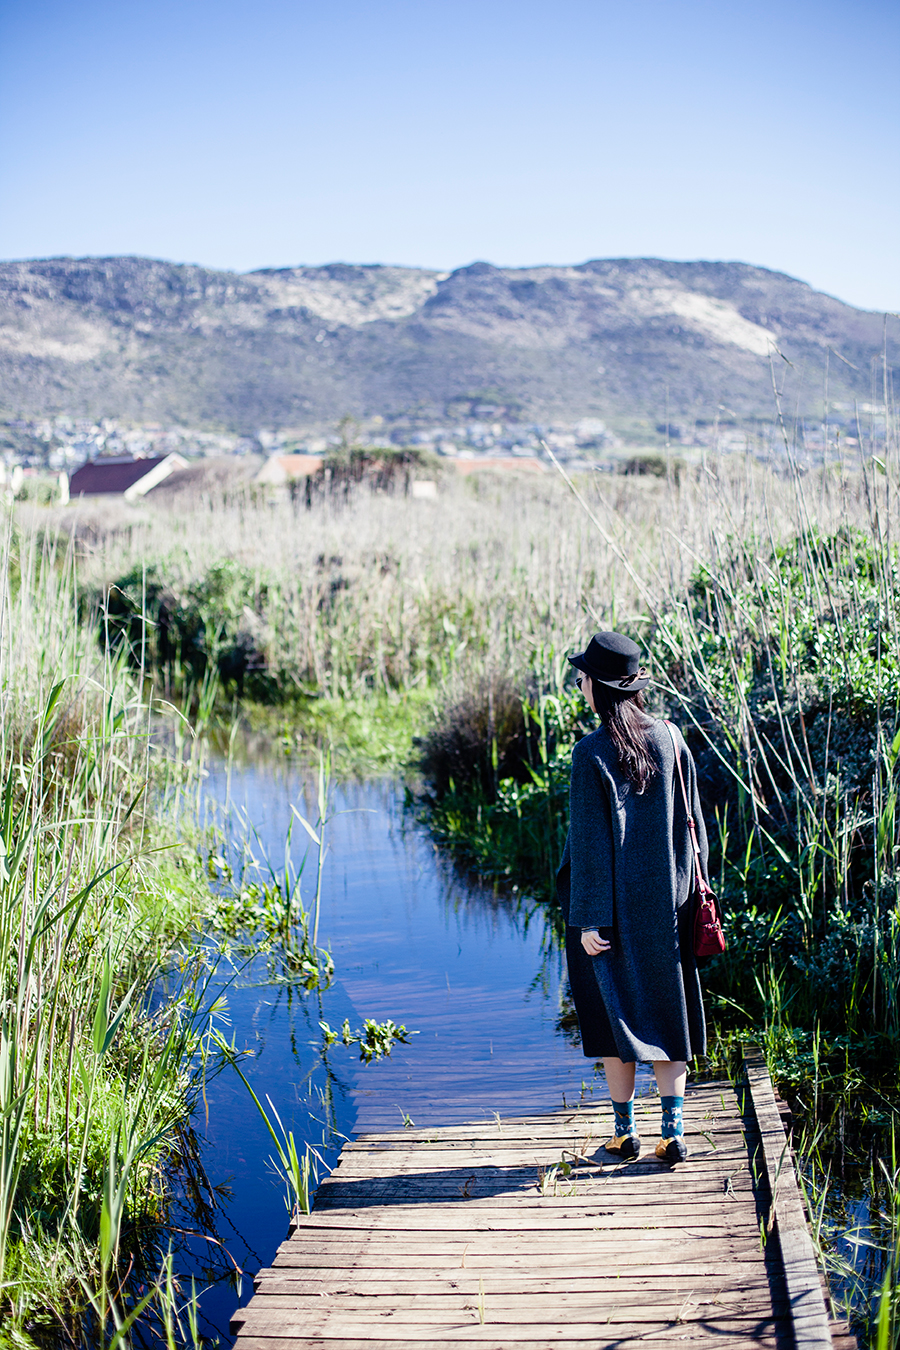 Walking on a partially-submerged boardwalk at the Silvermine Wetland Conservation Area, Fish Hoek, Cape Town, South Africa.